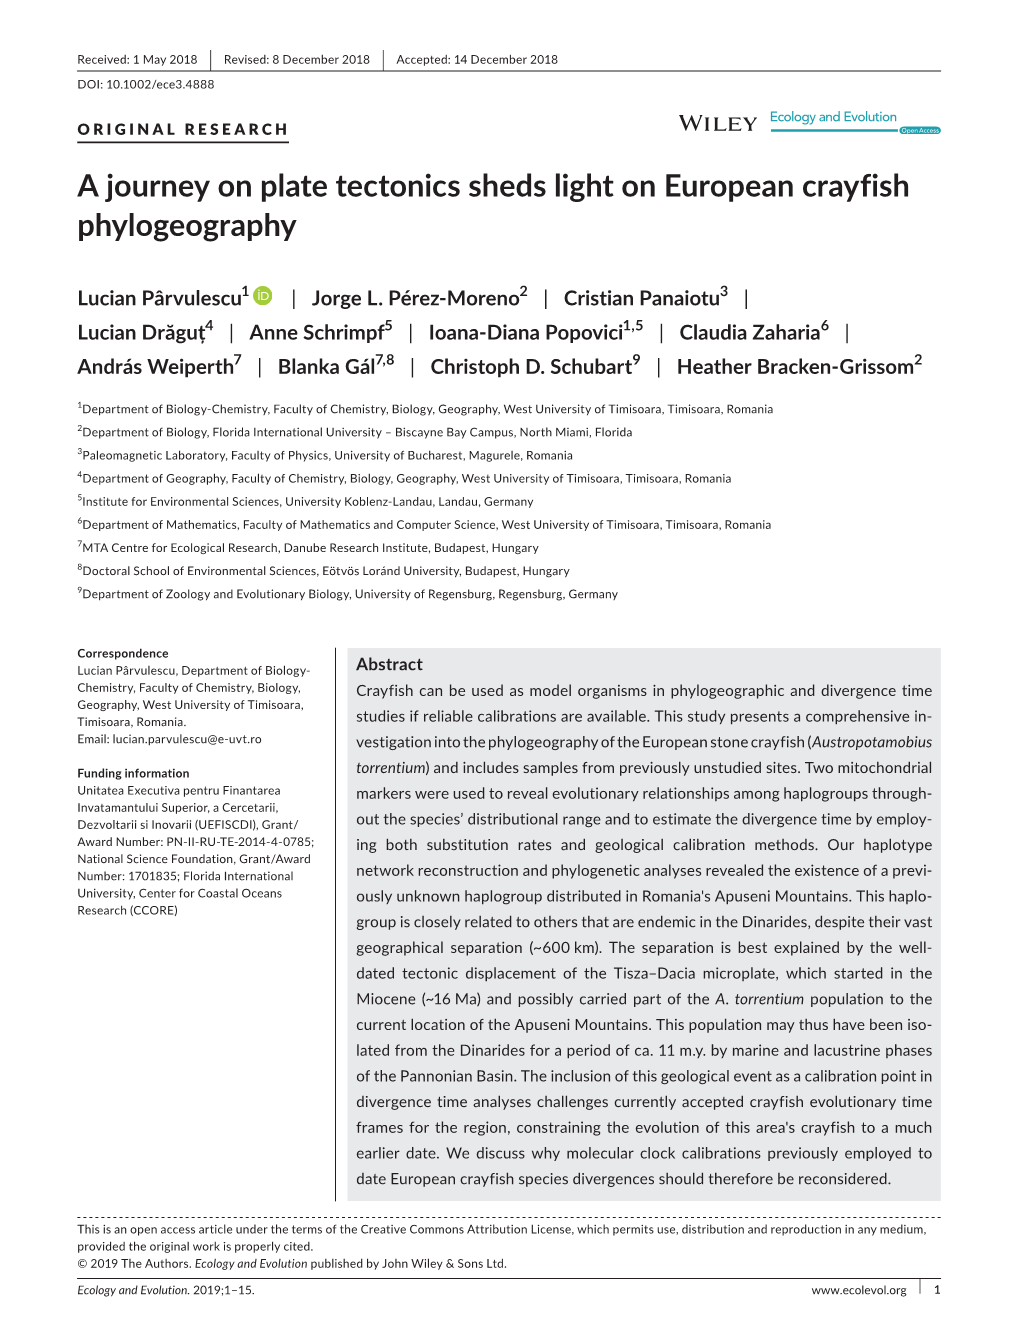 A Journey on Plate Tectonics Sheds Light on European Crayfish Phylogeography